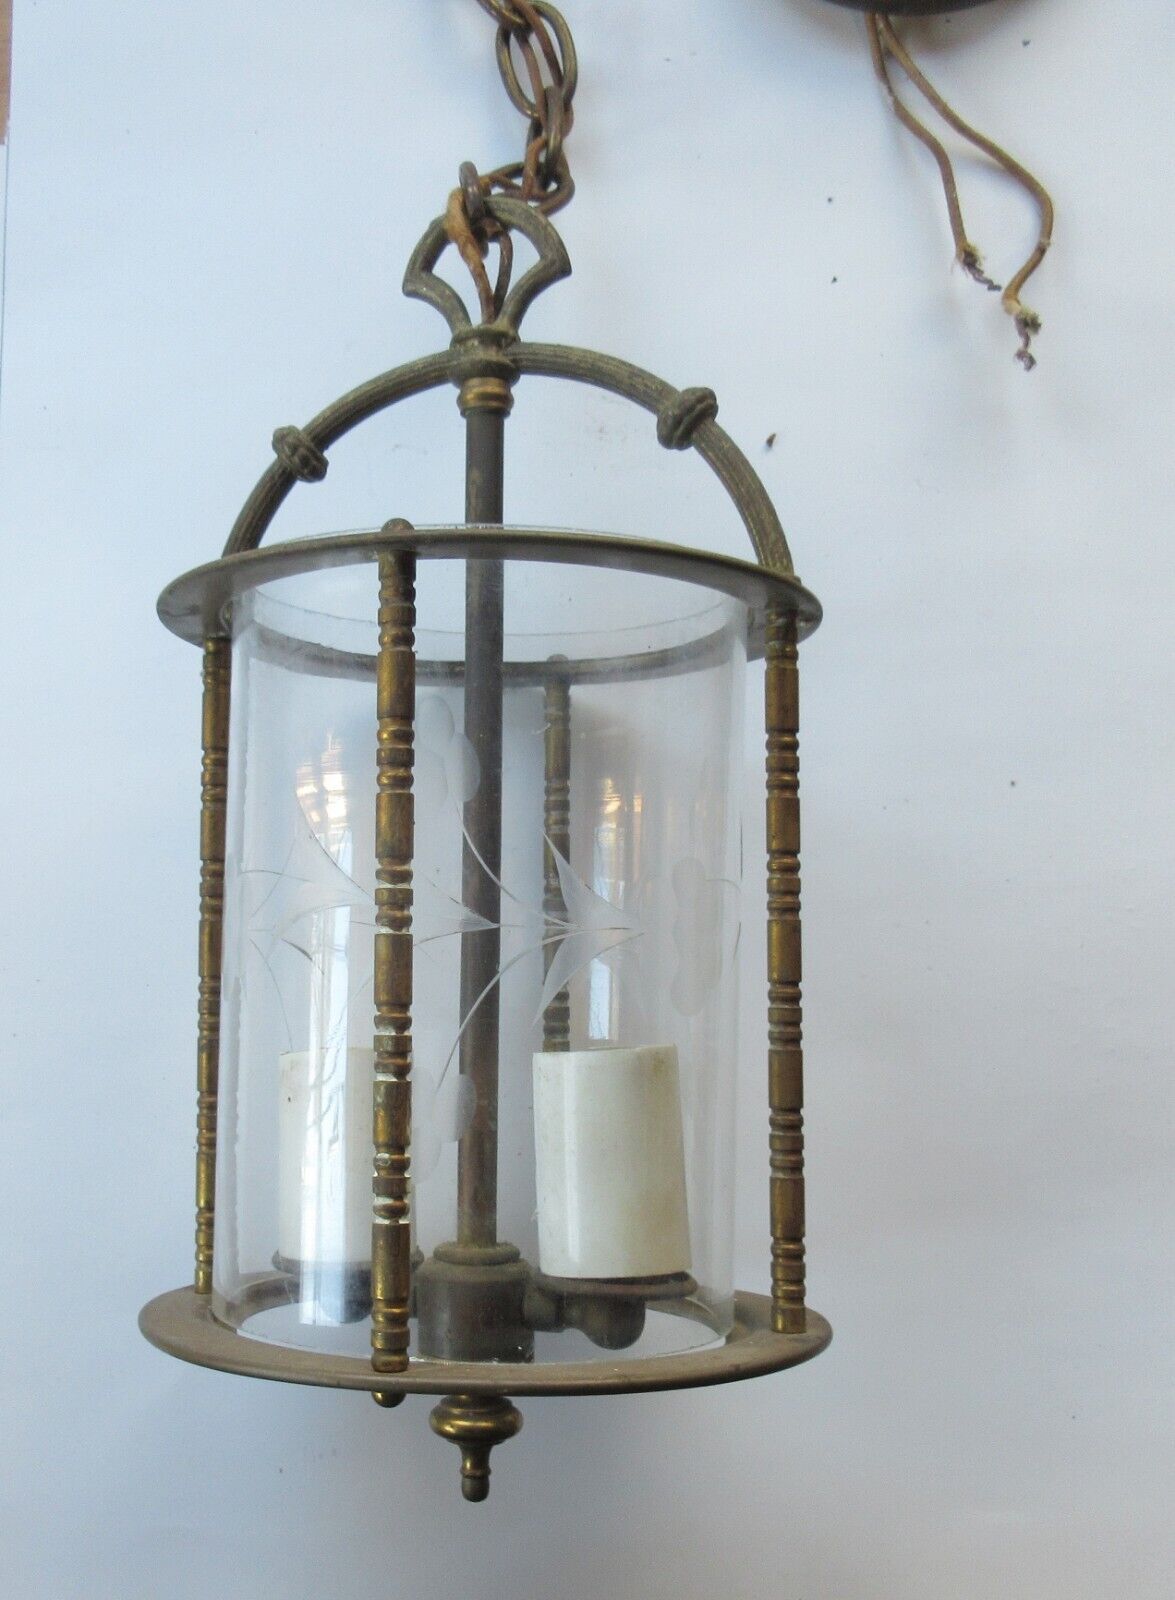 Vintage antique solid brass and etched glass hanging ceiling light ornate